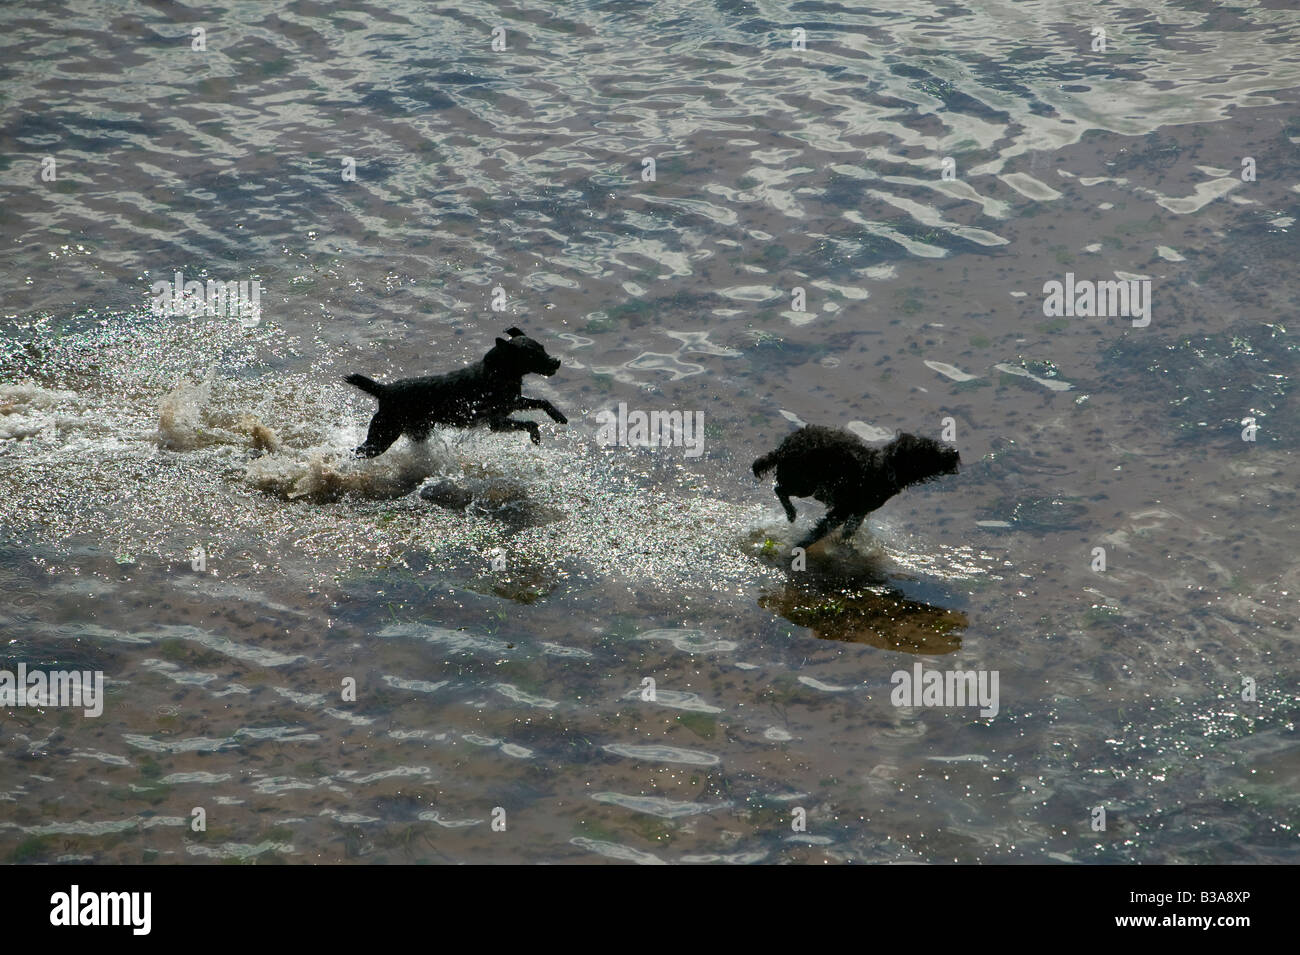 Two small black dogs run through shallow water on a beach at Torquay Stock Photo